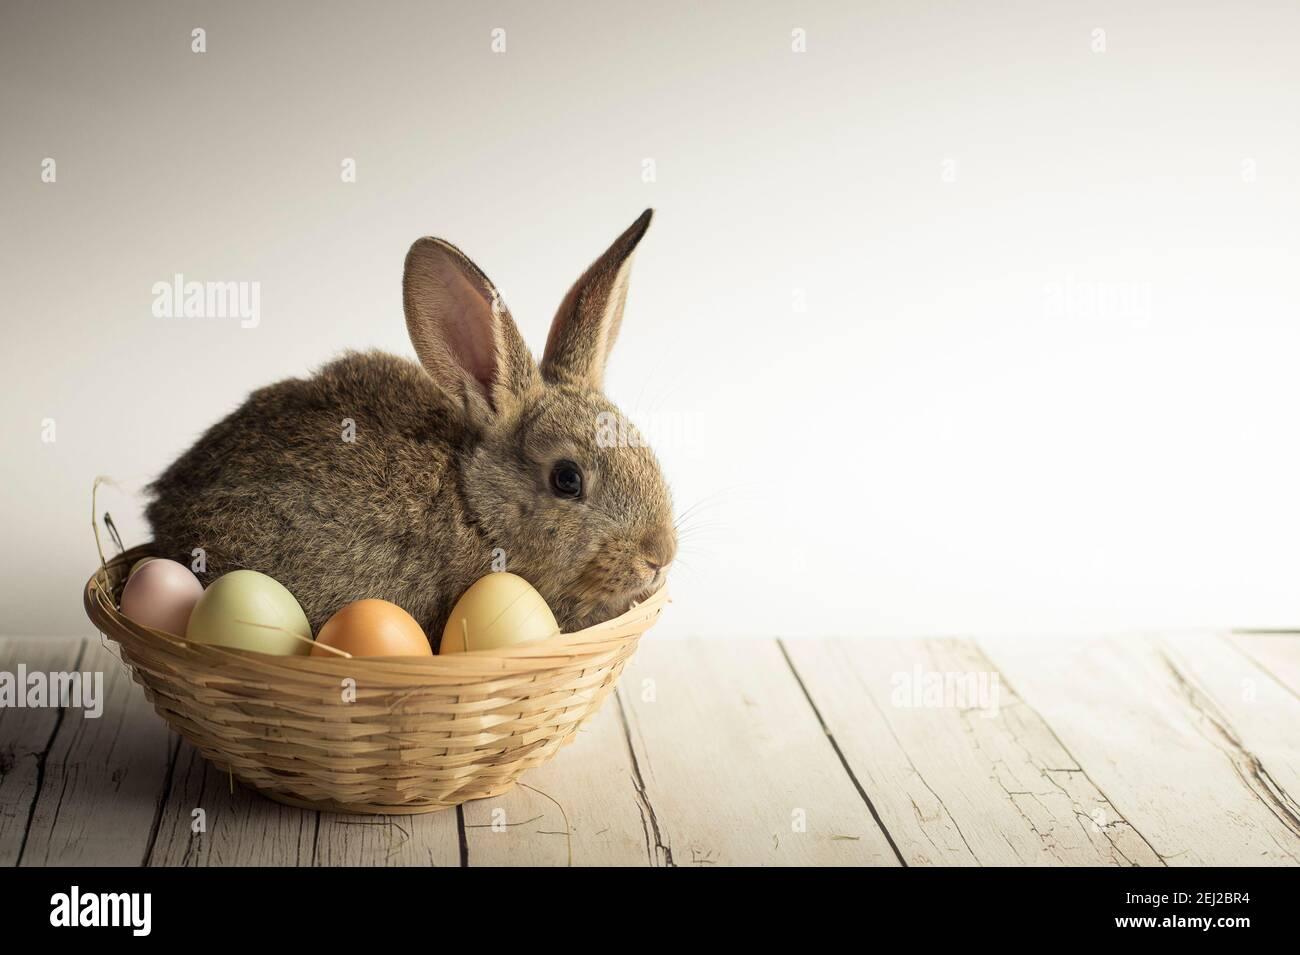 Cute Easter Bunny Nestled In A Basket With Colorful Eggs On White